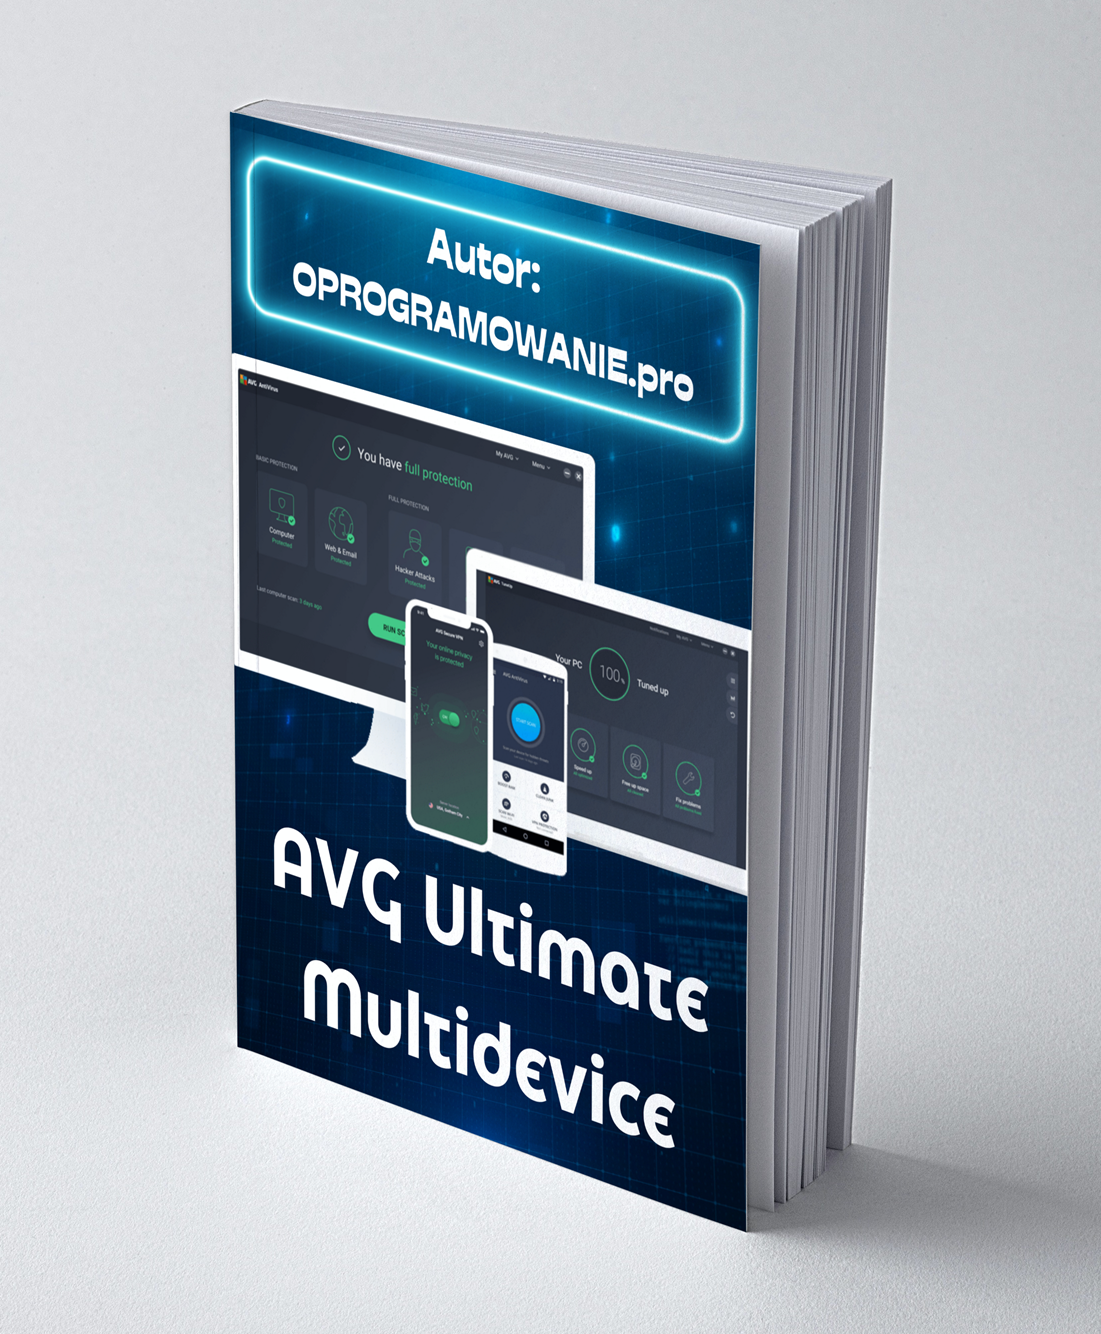 AVG Ultimate Multidevice (PC/Android/Mac/iOS)